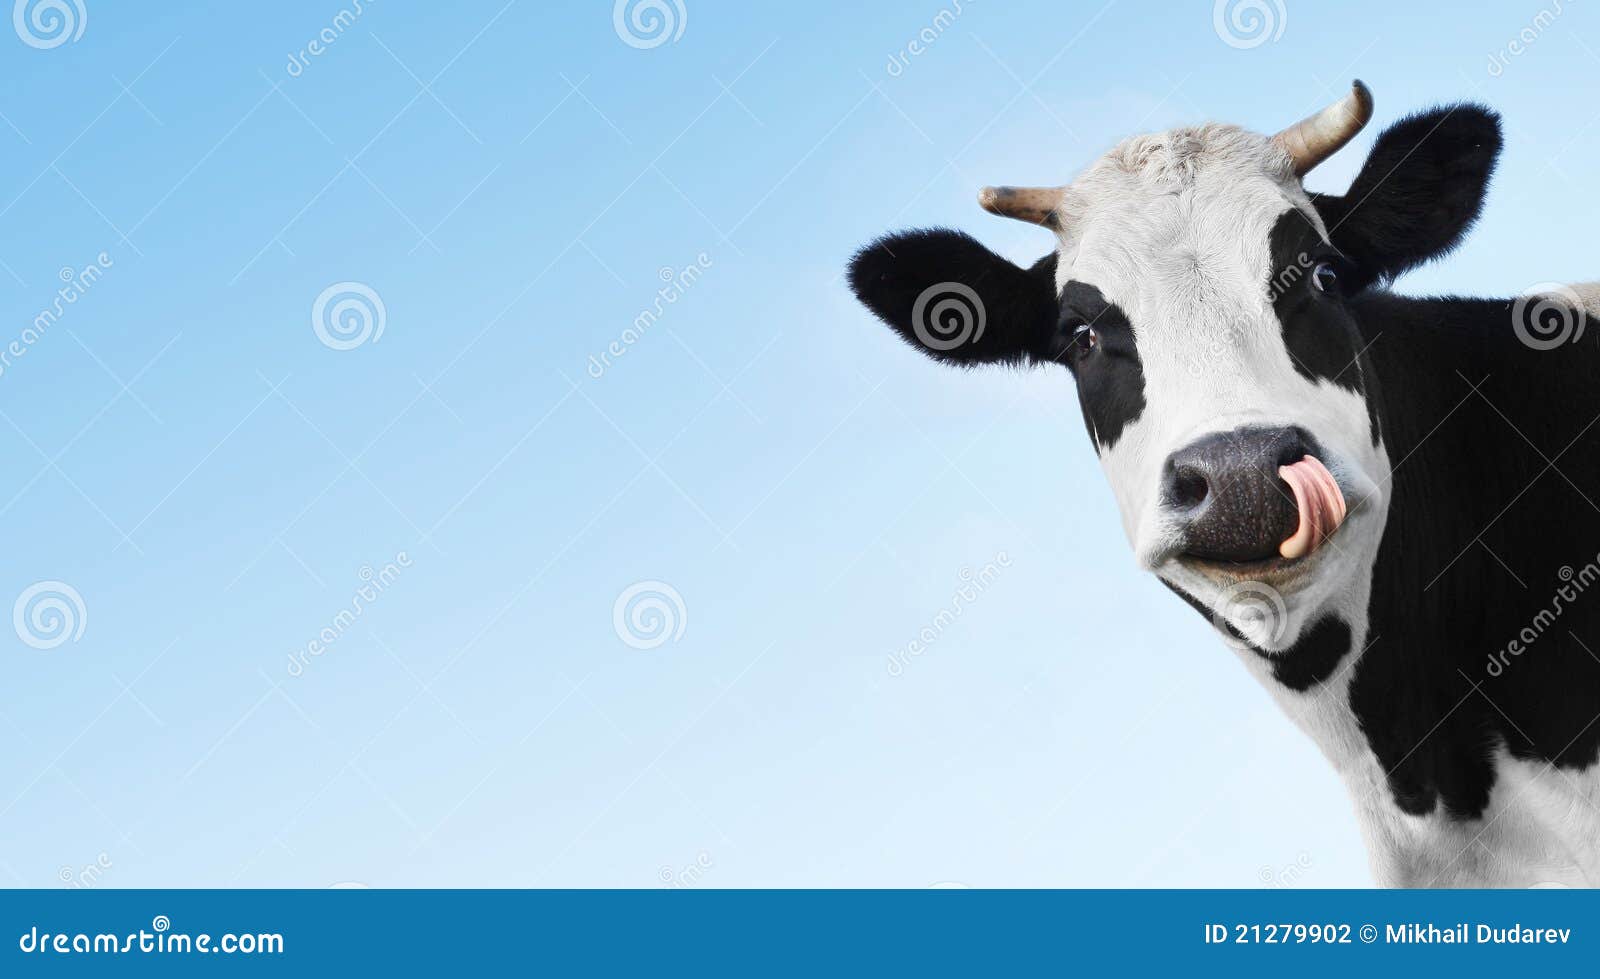 Cow PNG Images, Download 24000+ Cow PNG Resources with Transparent  Background